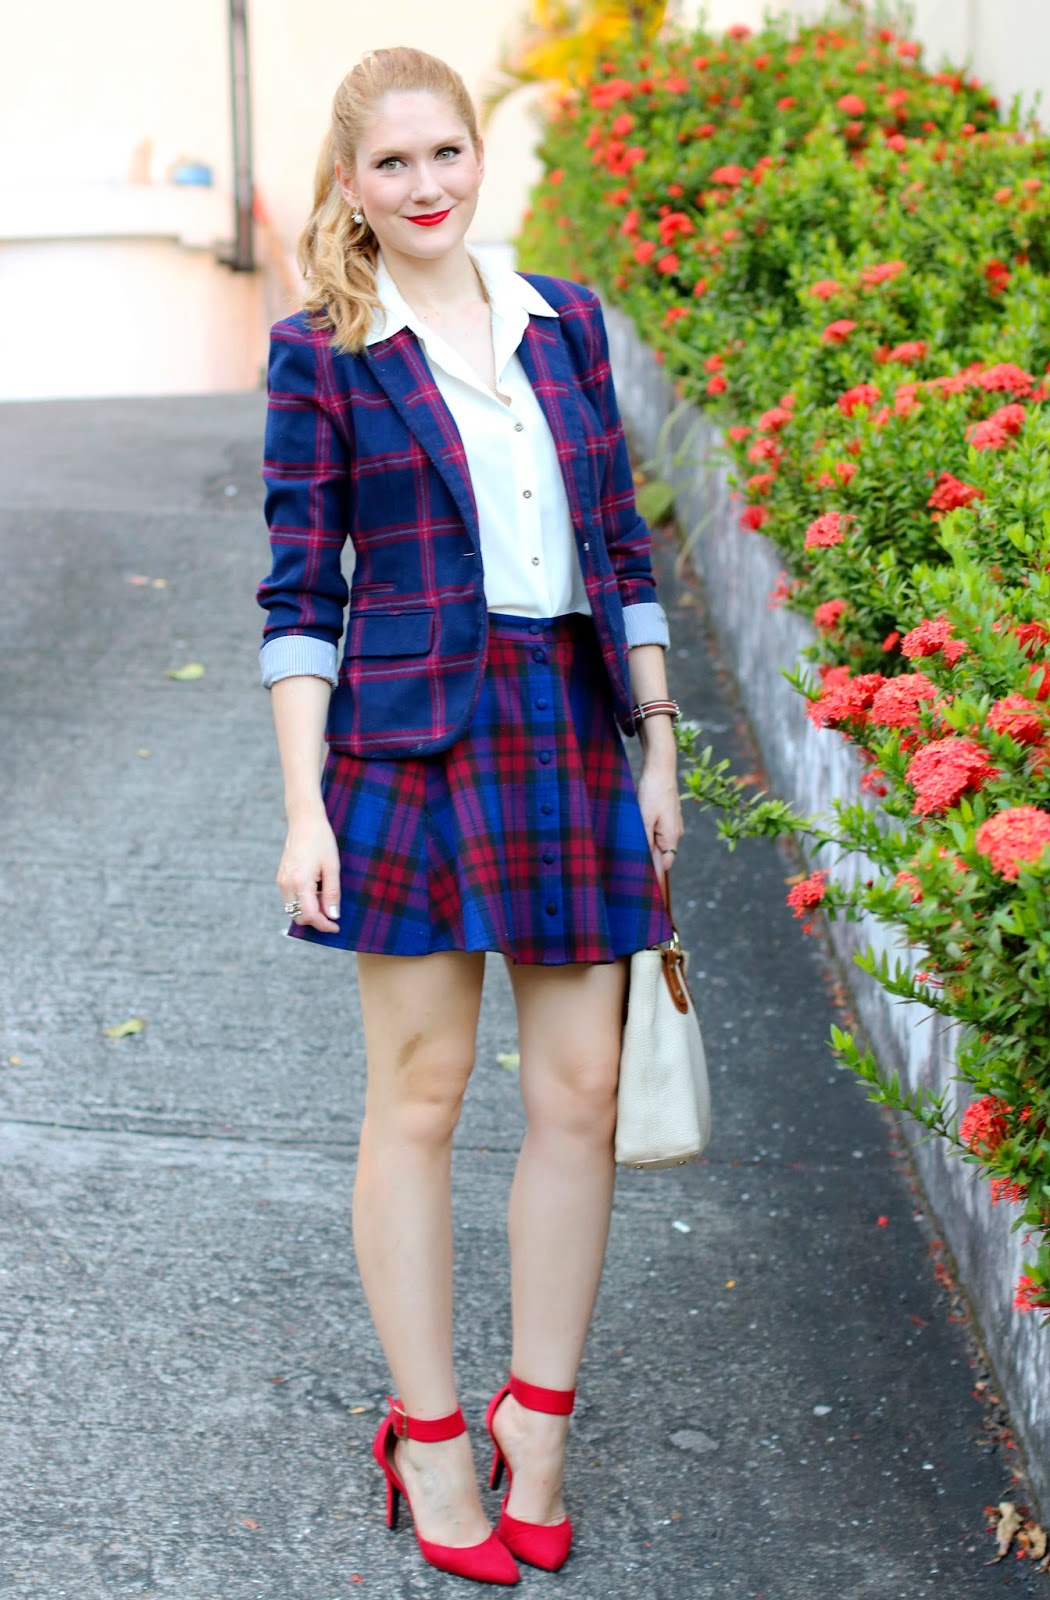 Cute plaid outfit for the holidays!